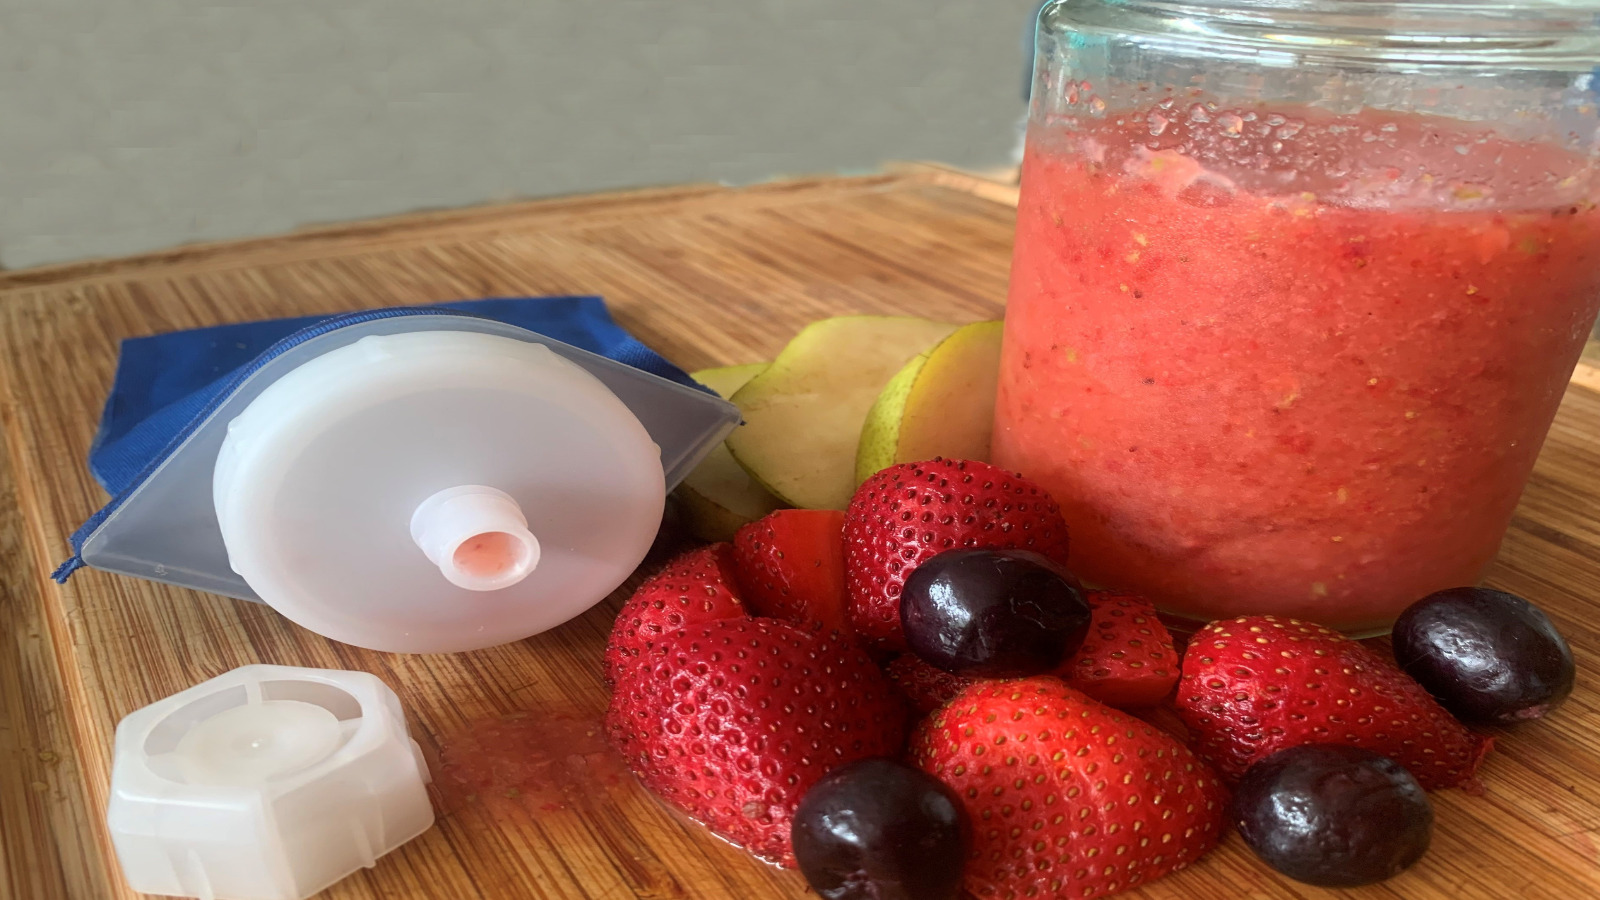 You are currently viewing IMMUNE-BOOSTING BERRY, PEAR, KALE, ANTI-AGING SMOOTHIE